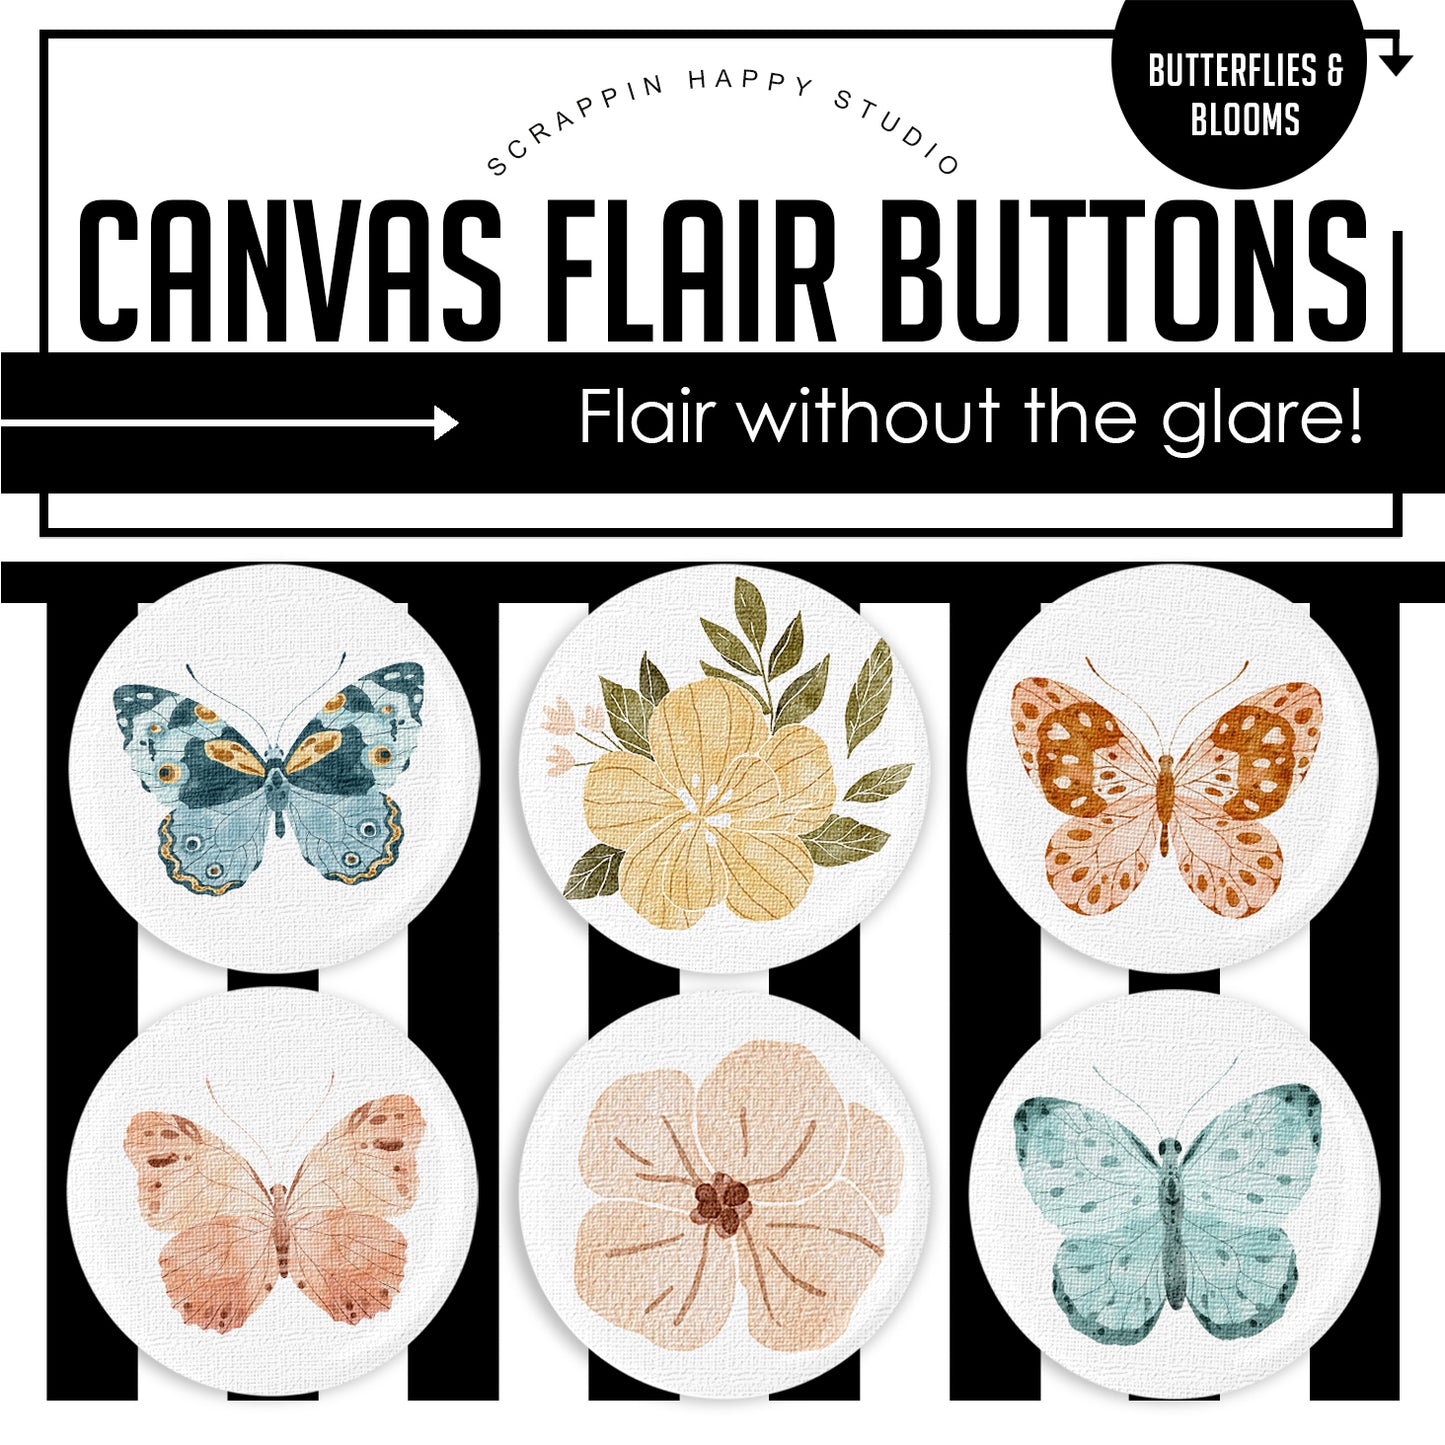 Butterflies And blooms Canvas Flair